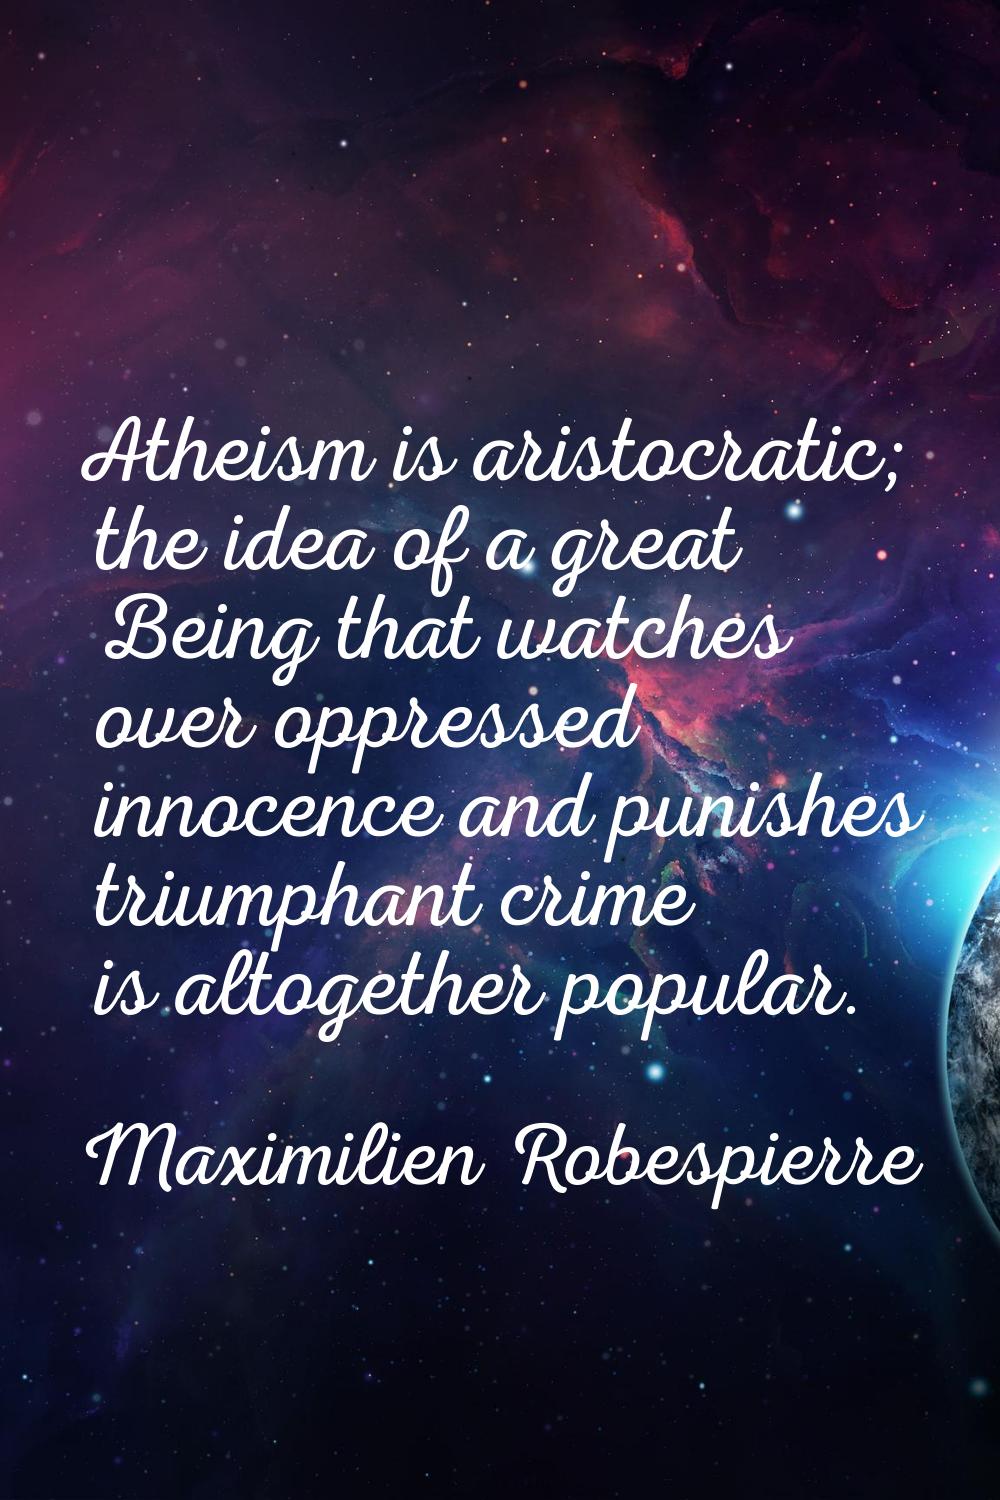 Atheism is aristocratic; the idea of a great Being that watches over oppressed innocence and punish